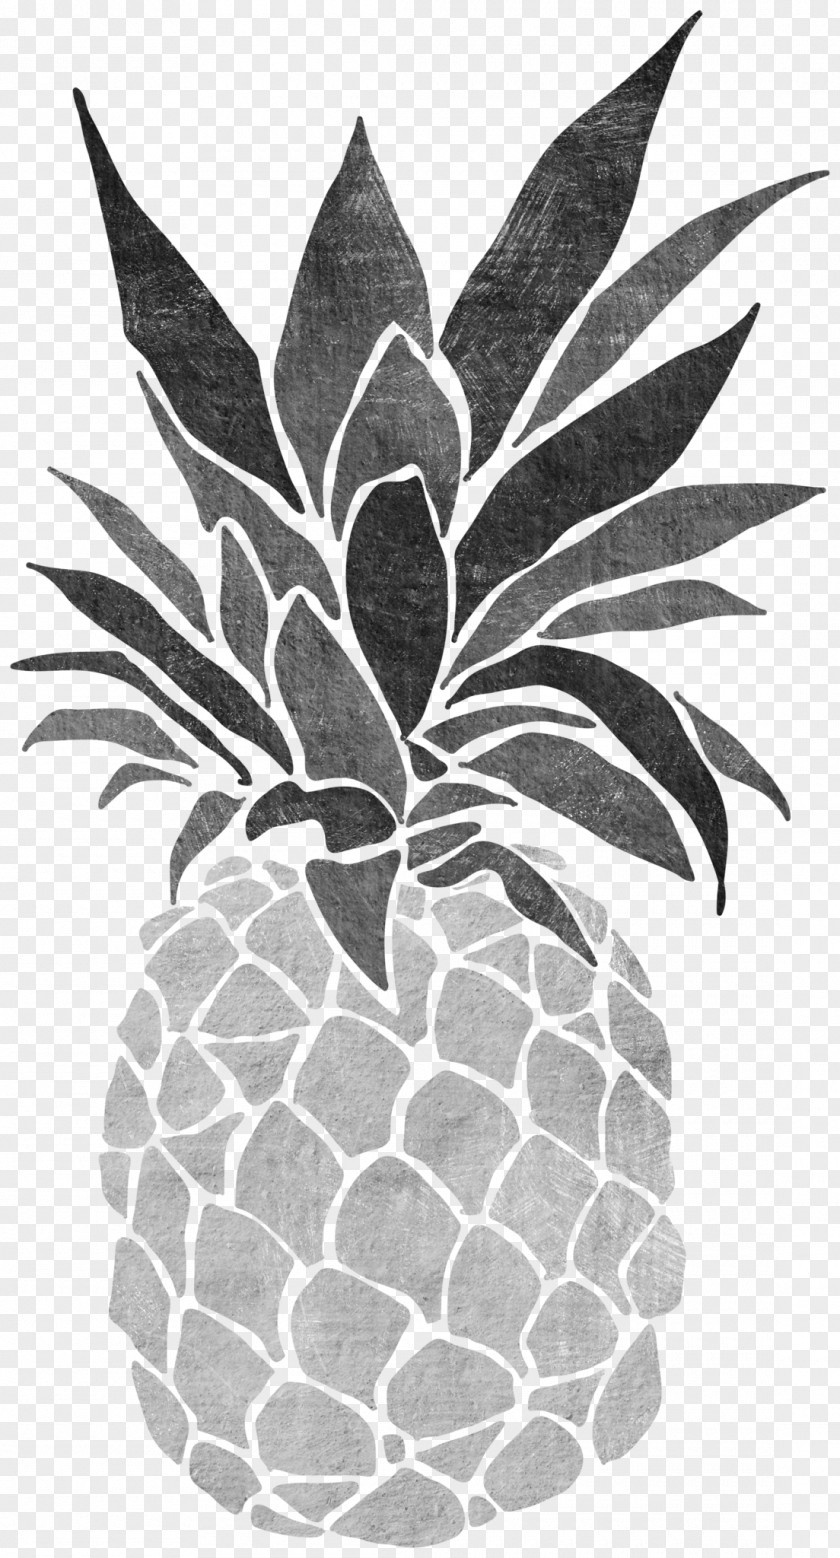 Temporary Tattoos Pineapple Paper Printing Image Poster PNG